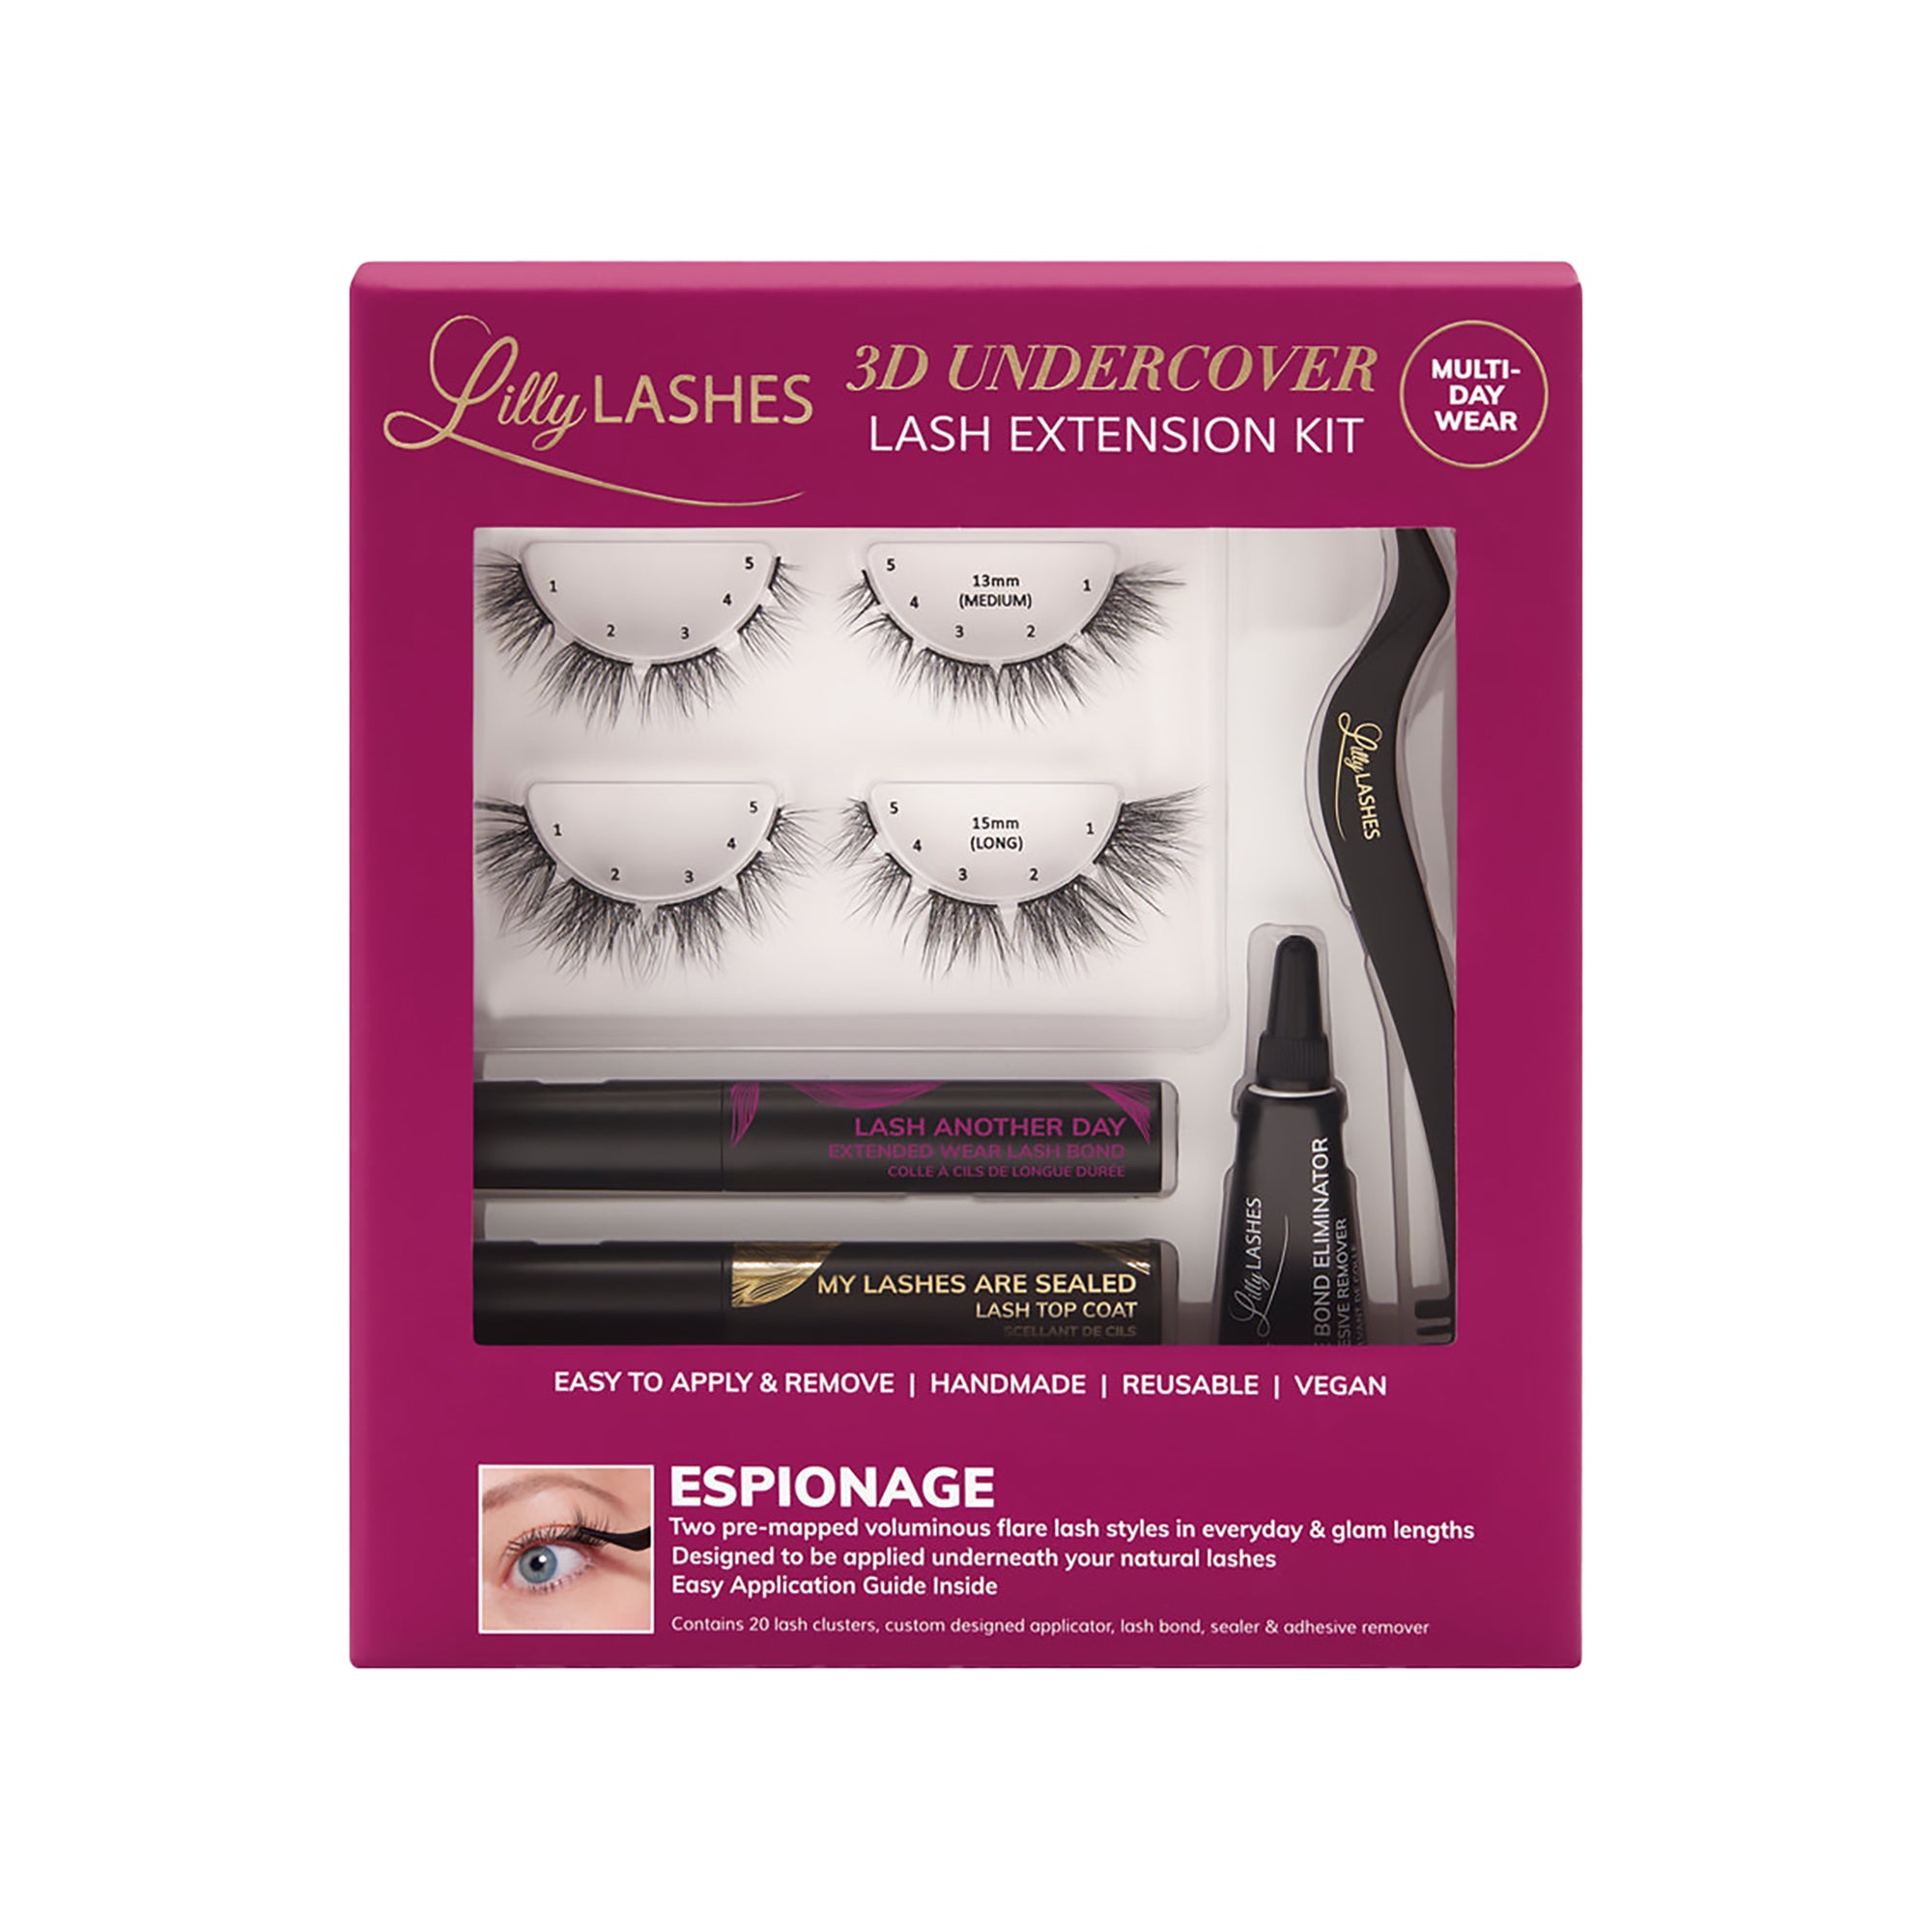 Lilly Lashes Espionage 3D Undercover Lash System / KIT